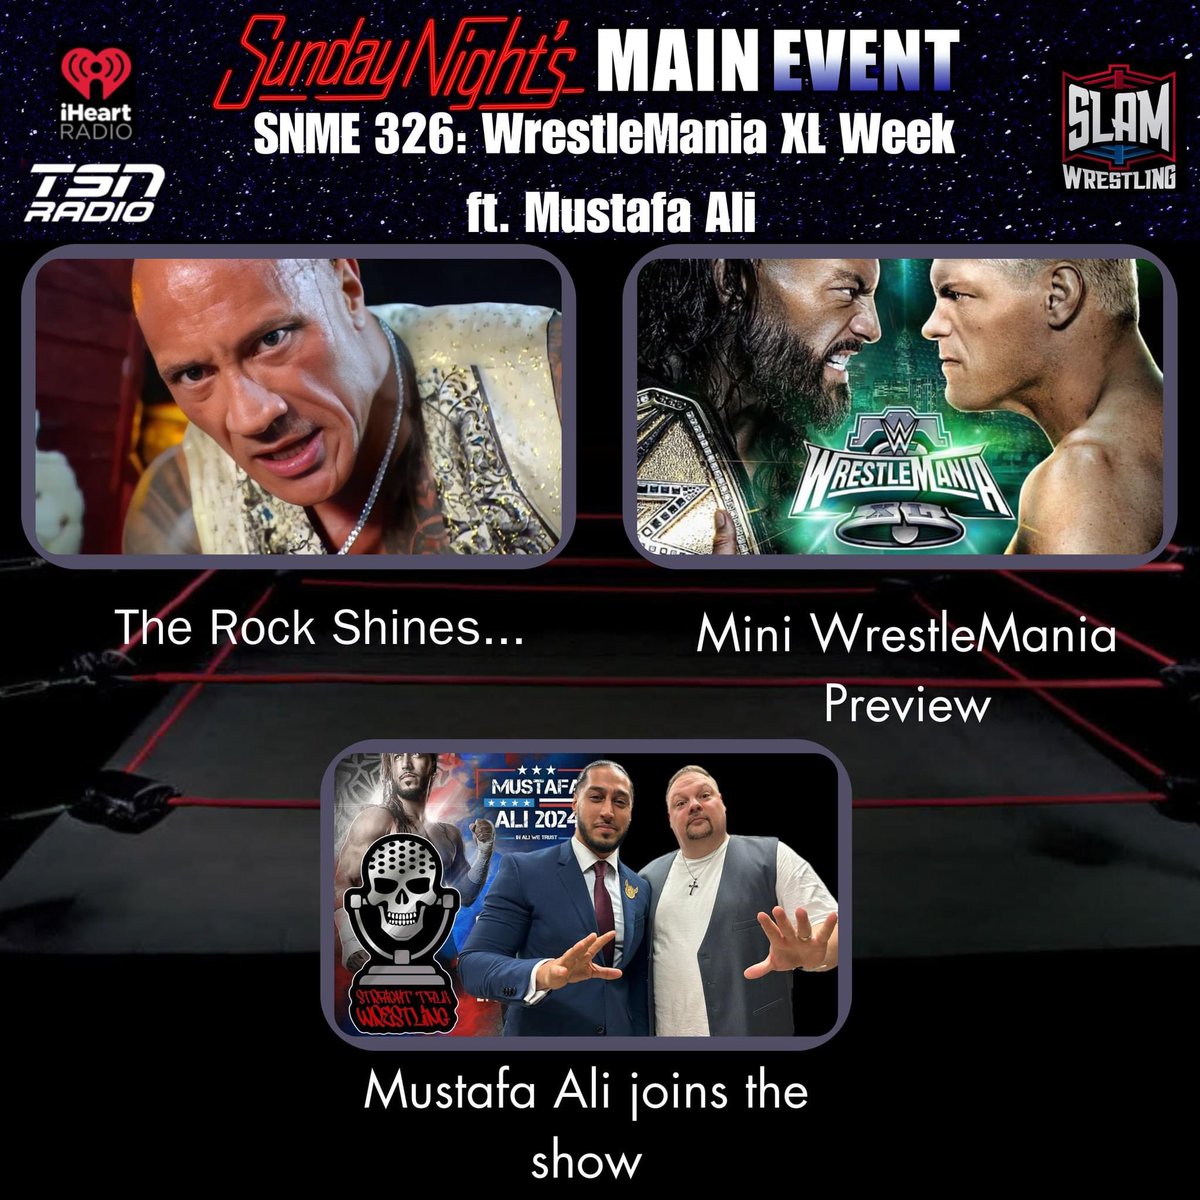 #ICYMI It’s #WrestleMania  Week and let #SNMERadio be your tour guides.Former #WWE star and current #TNAWrestling Star @MustafaAli_X joins @_StraightTalk. We also have a soft preview to next weekends #WrestleMania  sundaynightsmainevent.com/podcast/snme-3… #Wrestling #Podcast #prowtestling